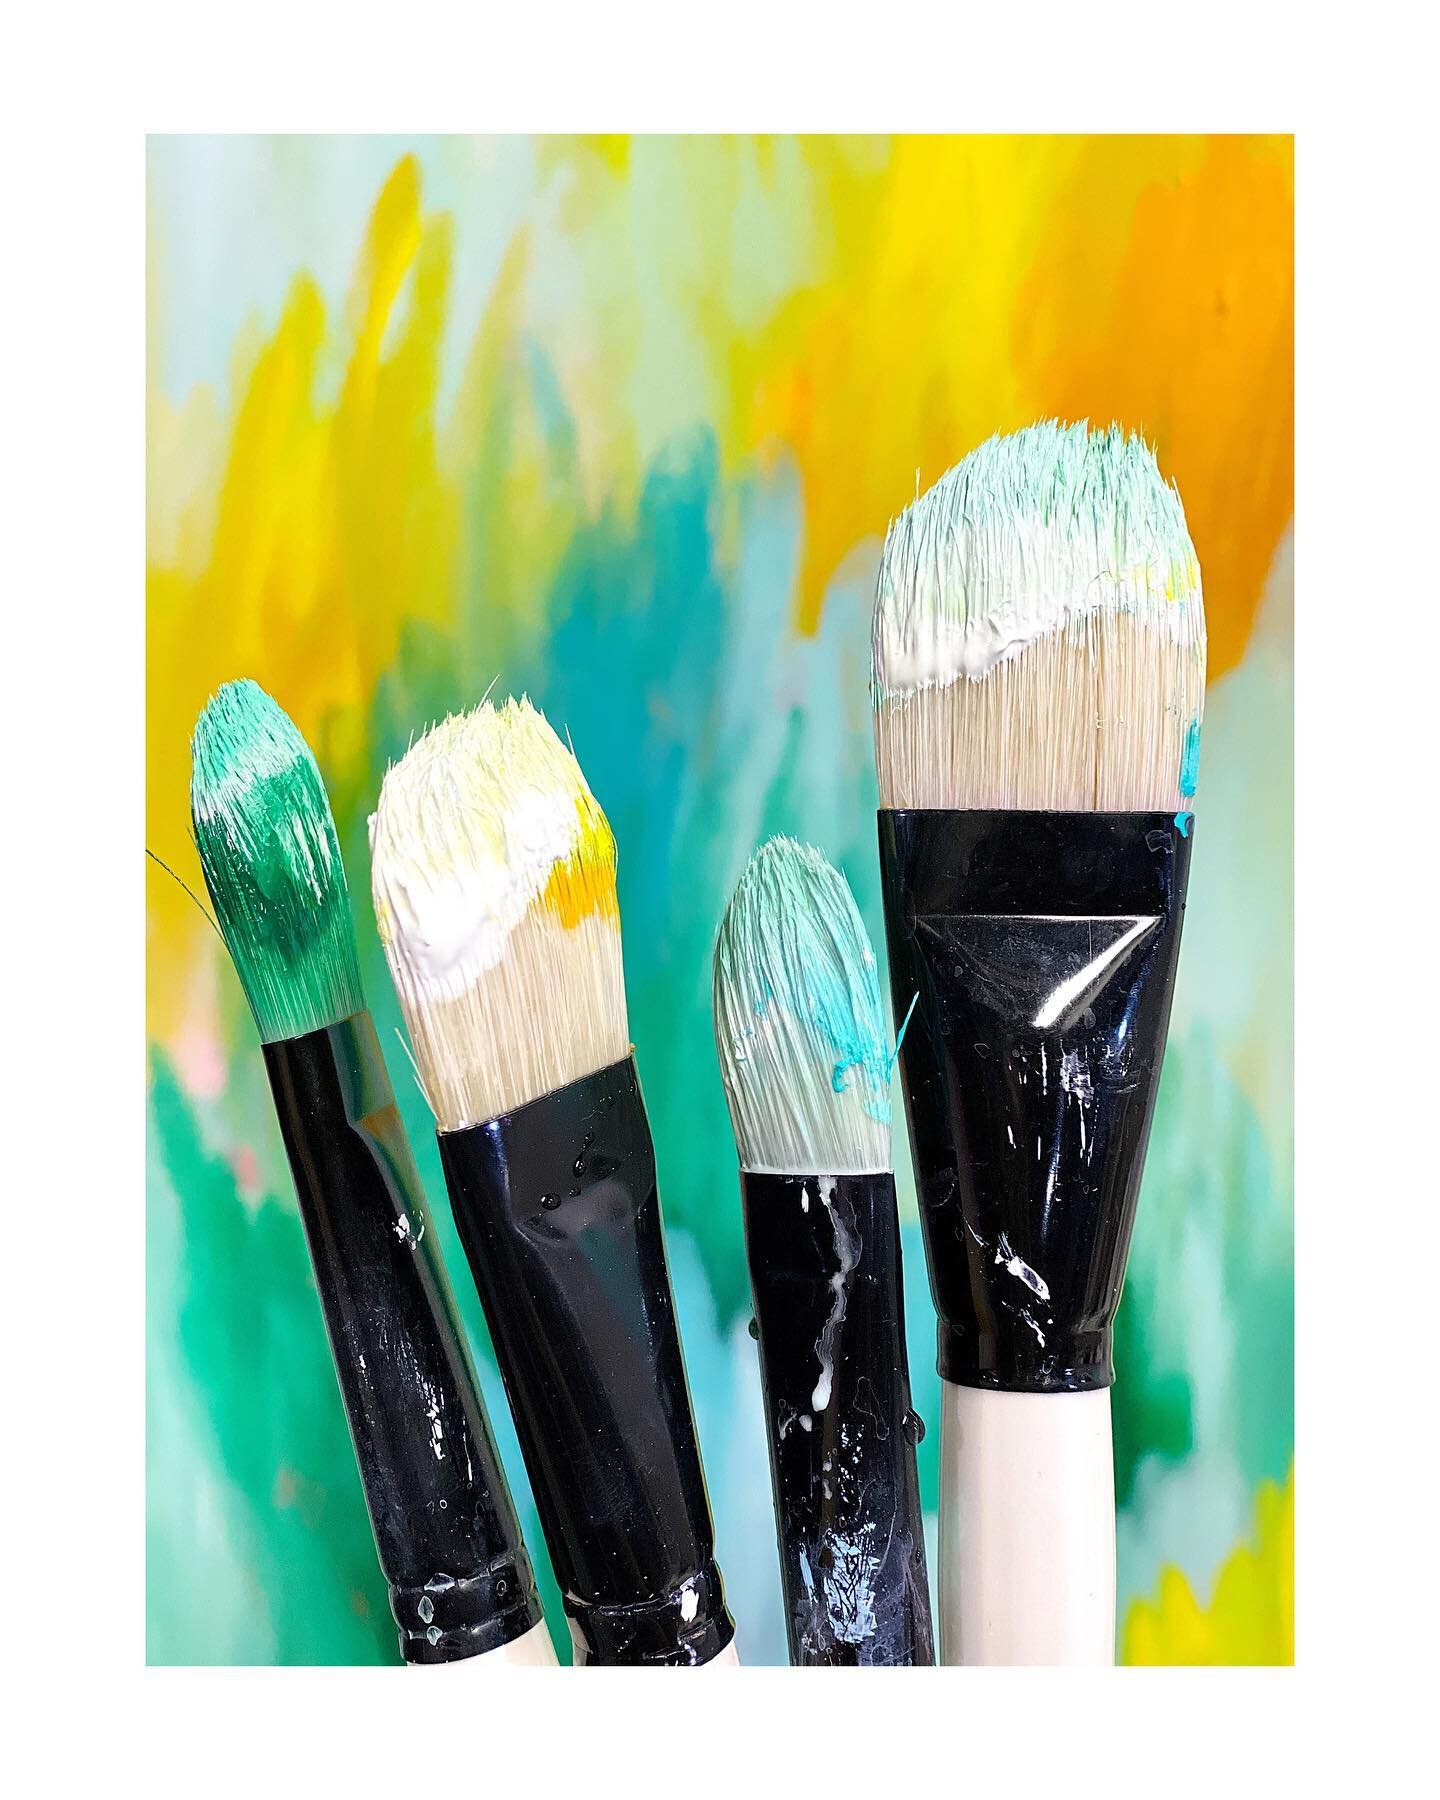 Boo yah!! It&rsquo;s Friday, and this color combo has got my soul doin a shimmy shake 💃🏻
Hope your weekend is full of sunshine and JOY! ✨
.
.
#fabulousfriday #colorpalettes #paintbrushes #doitfortheprocess #happyartist #madetocreate #createdtocreat